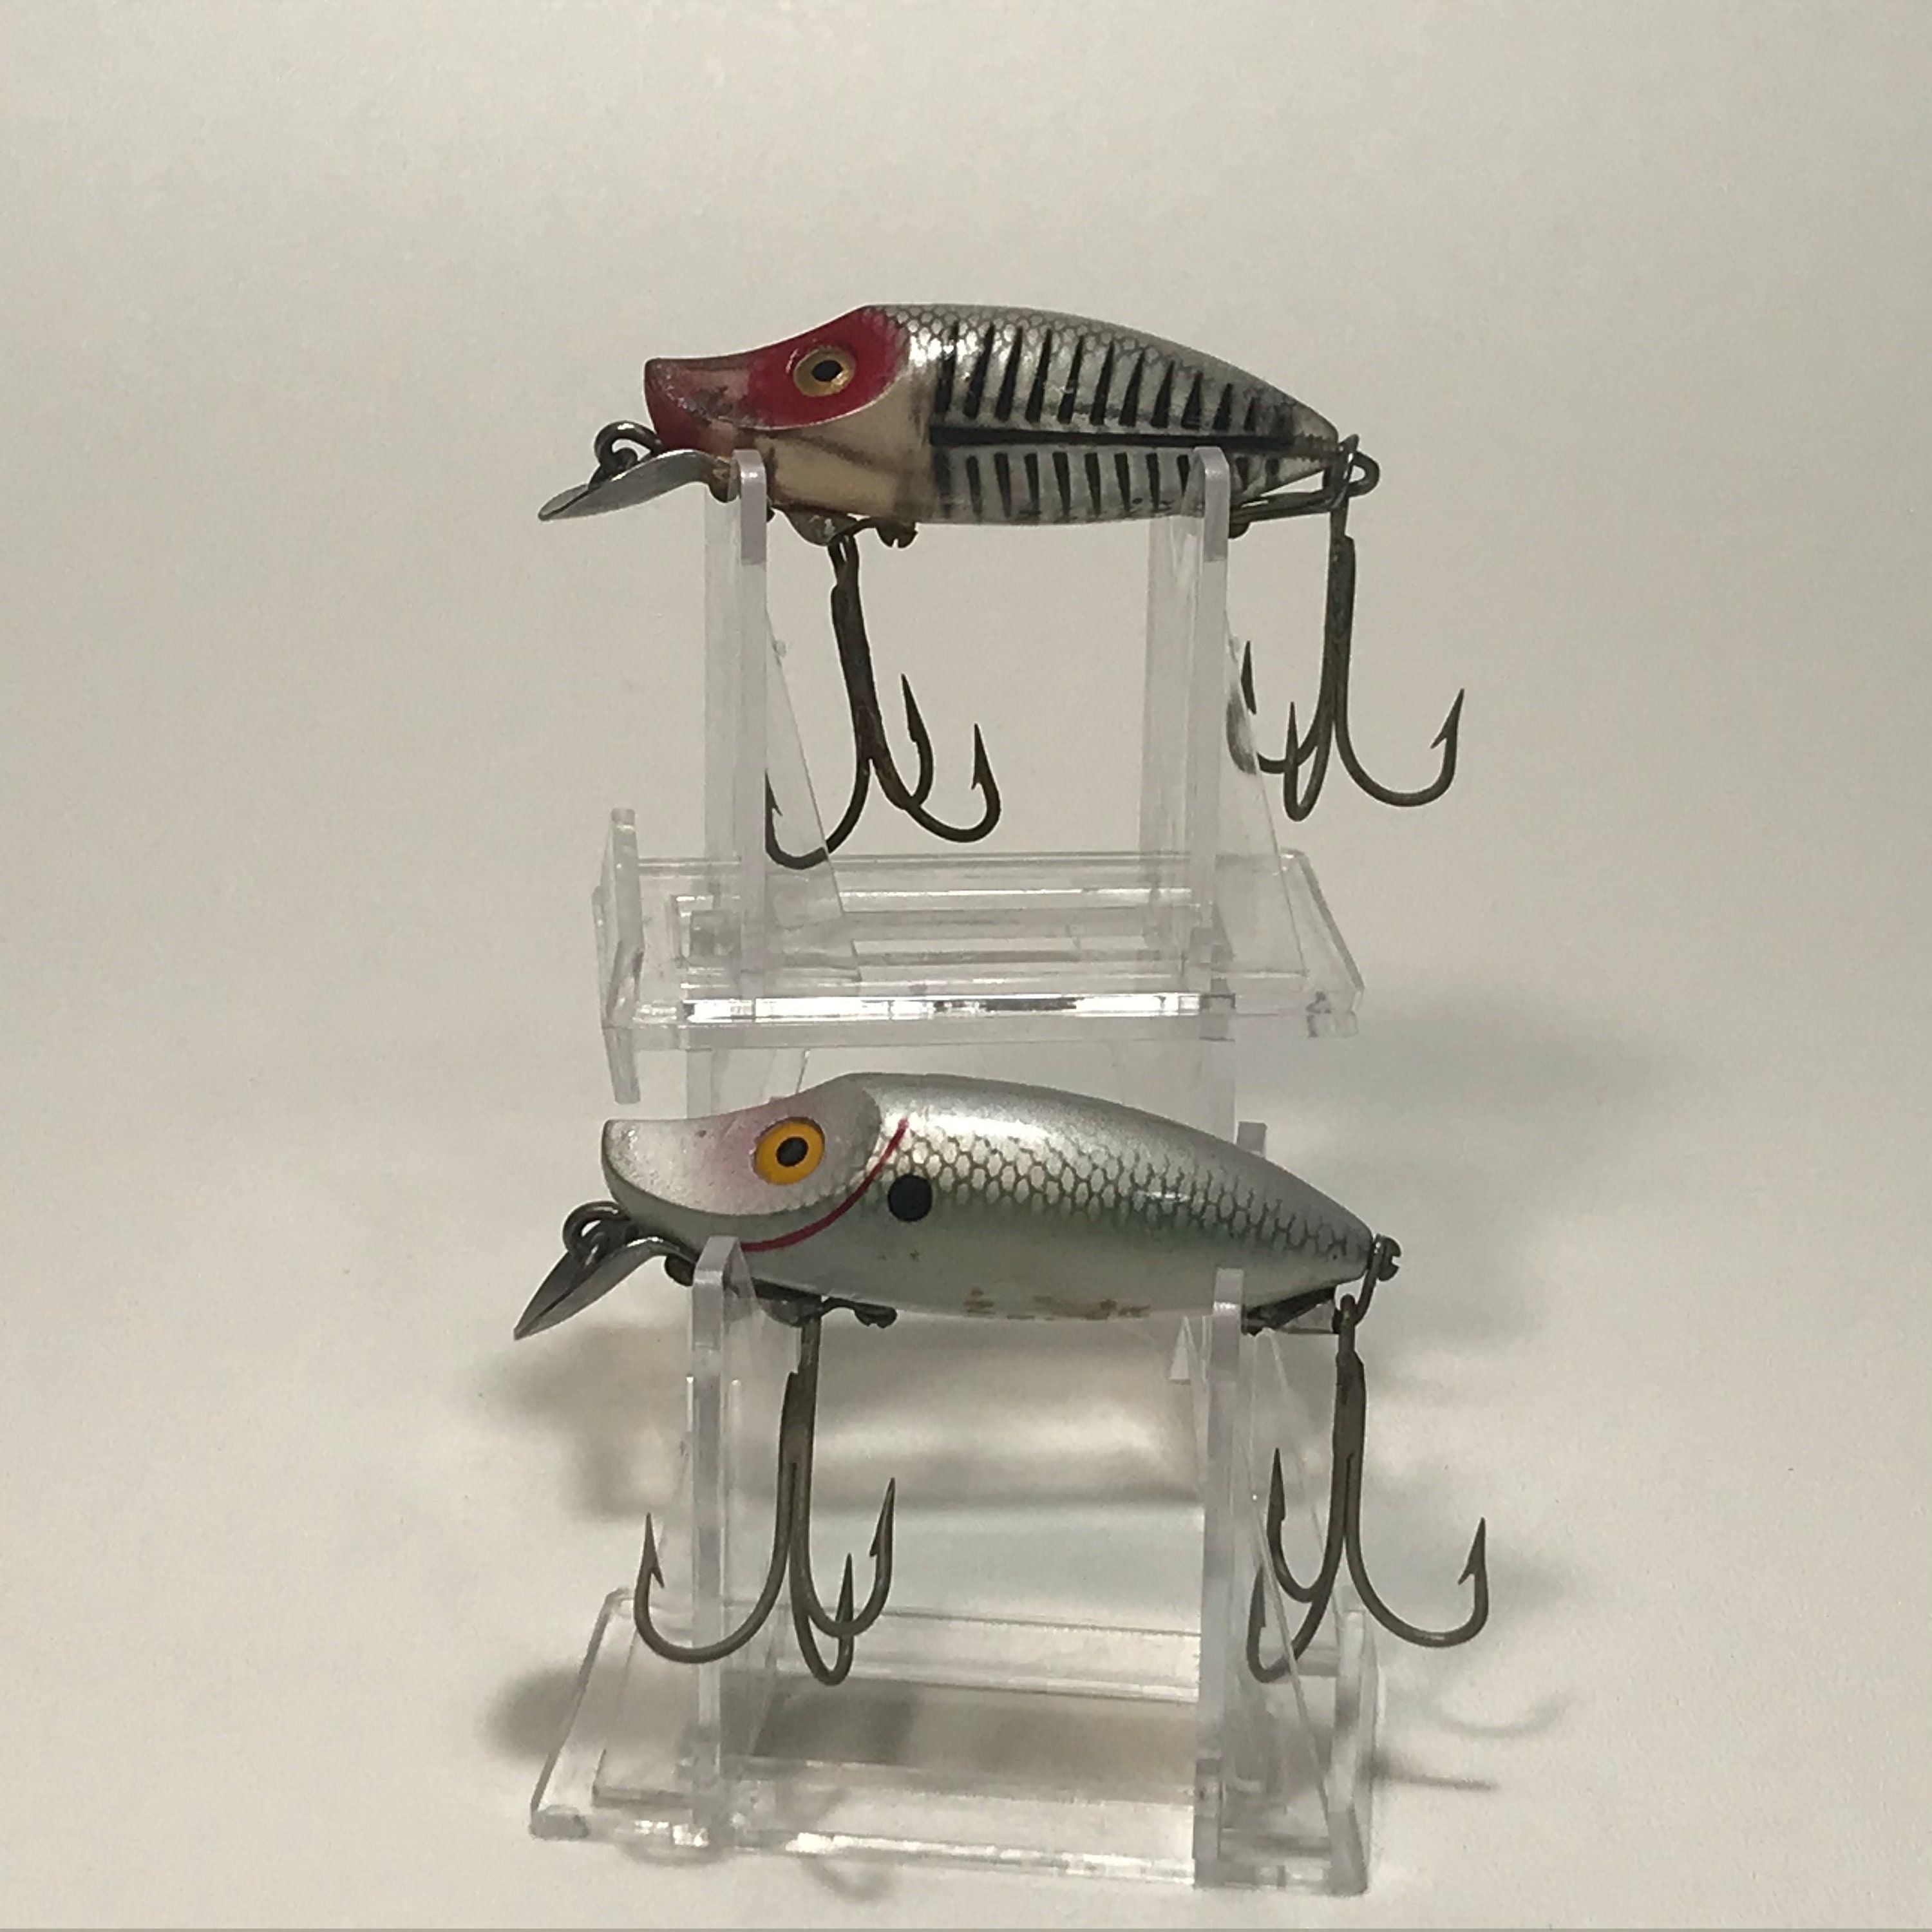 Heddon River Runt Spook Sinker Antique / Vintage Fishing Lure, Tackle,  Gear, Fish Crankbait Minnow Topwater Bait, Anglers Classic Fishhook -   Canada